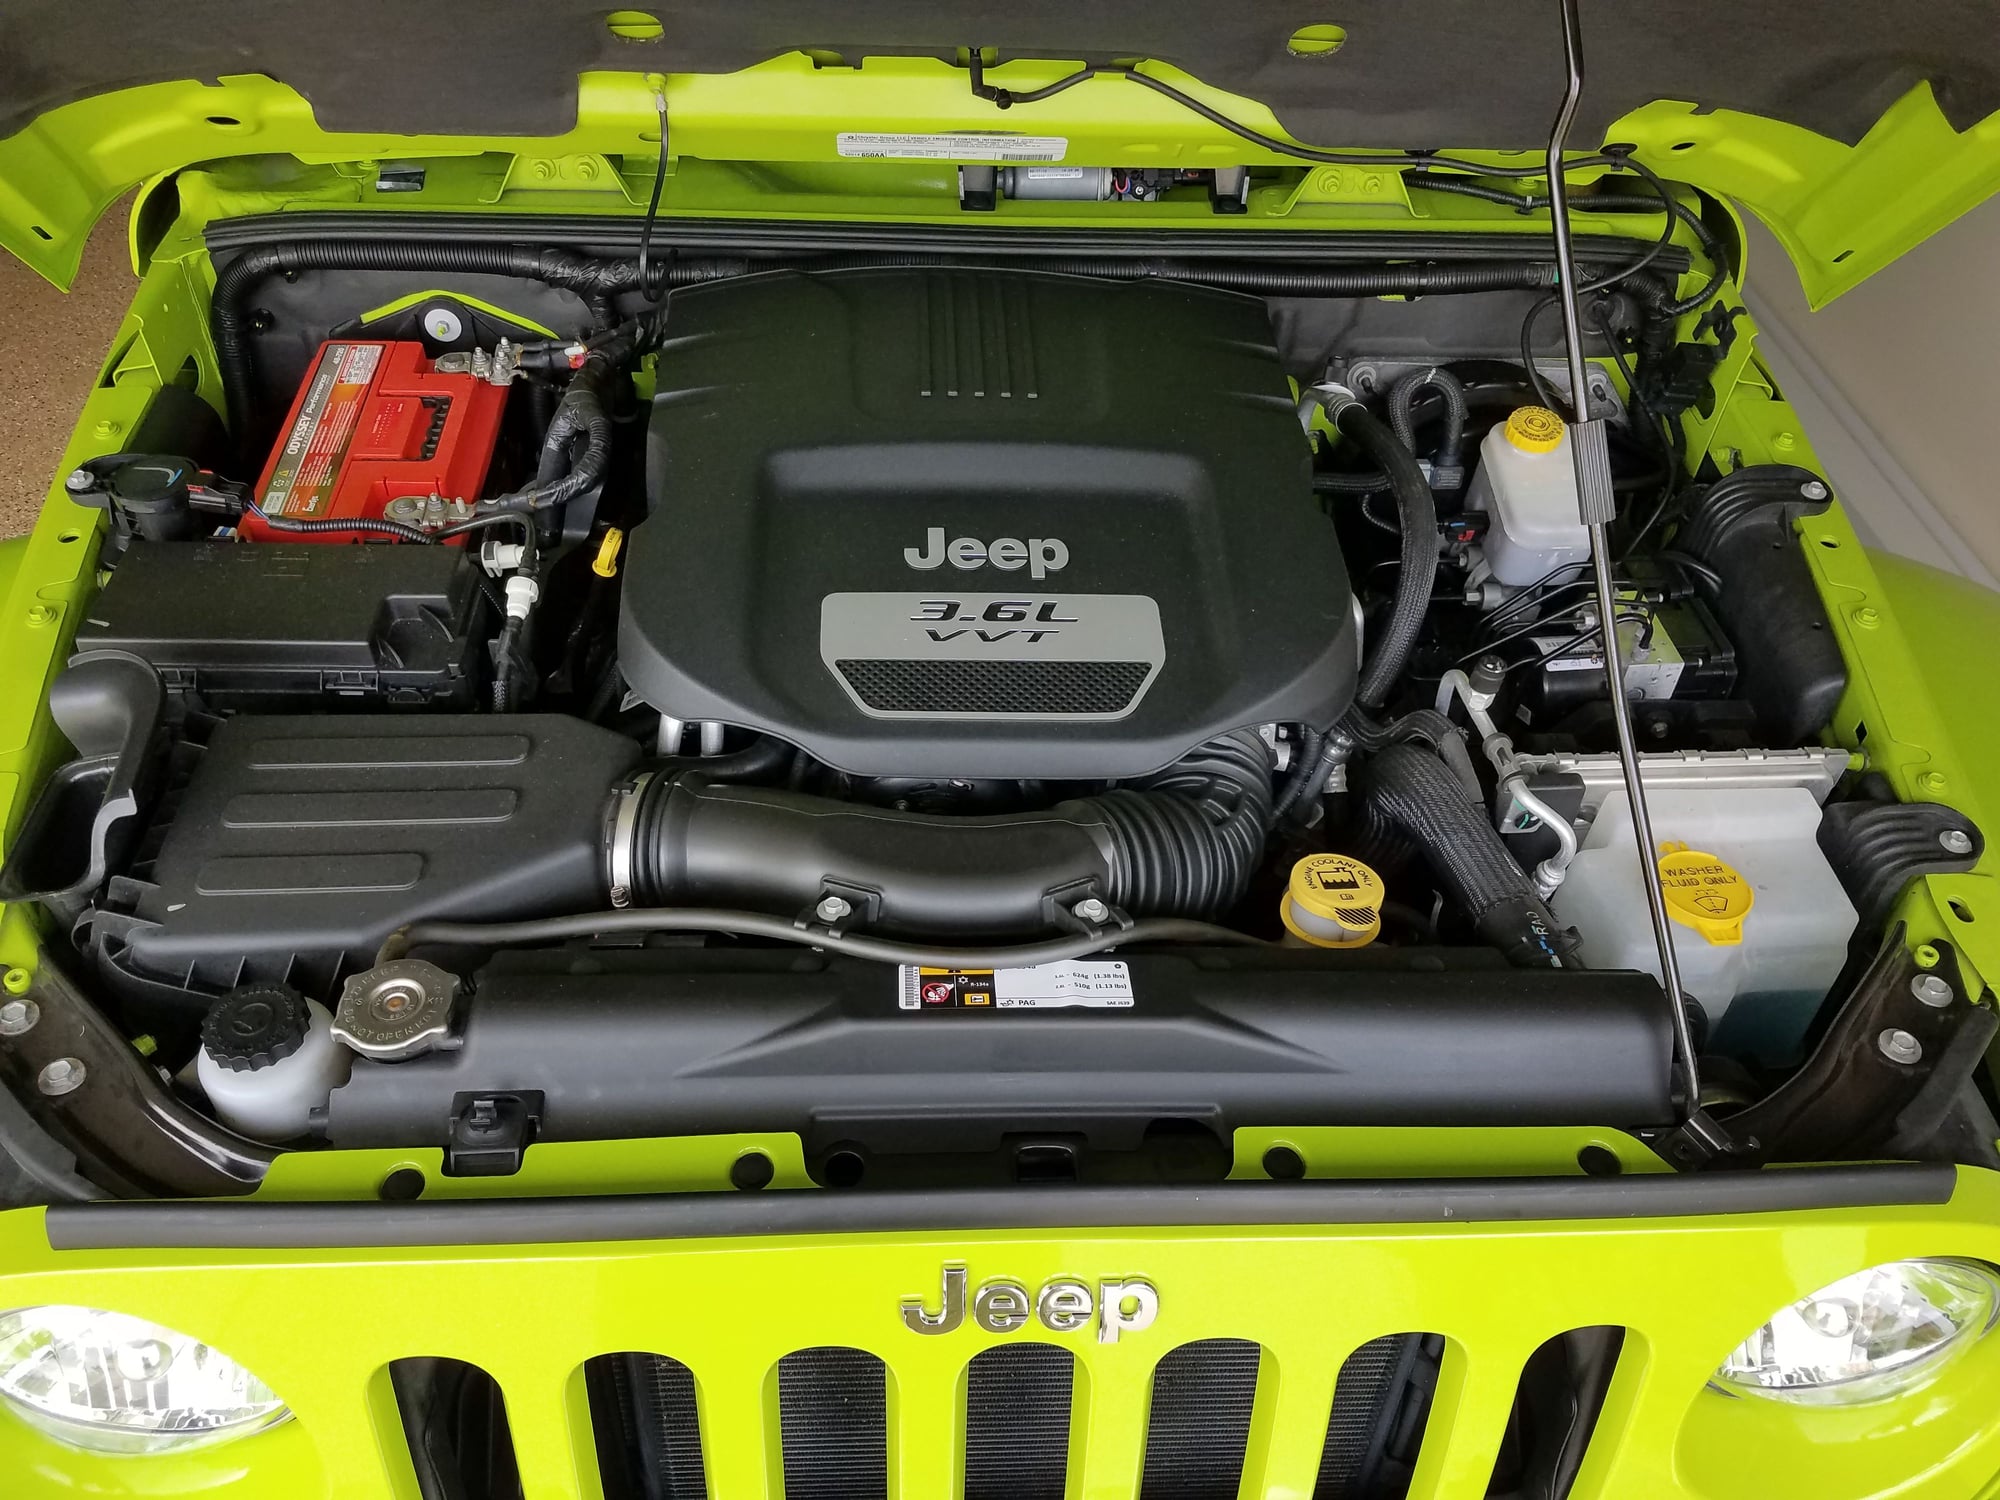 2012 Jeep Wrangler - Gecko Green Sahara, 2012, 13,800 Miles fully loaded - Used - VIN 1C4AJWBG1CL242281 - 13,800 Miles - 6 cyl - 4WD - Manual - SUV - Other - Peoria, IL 61615, United States